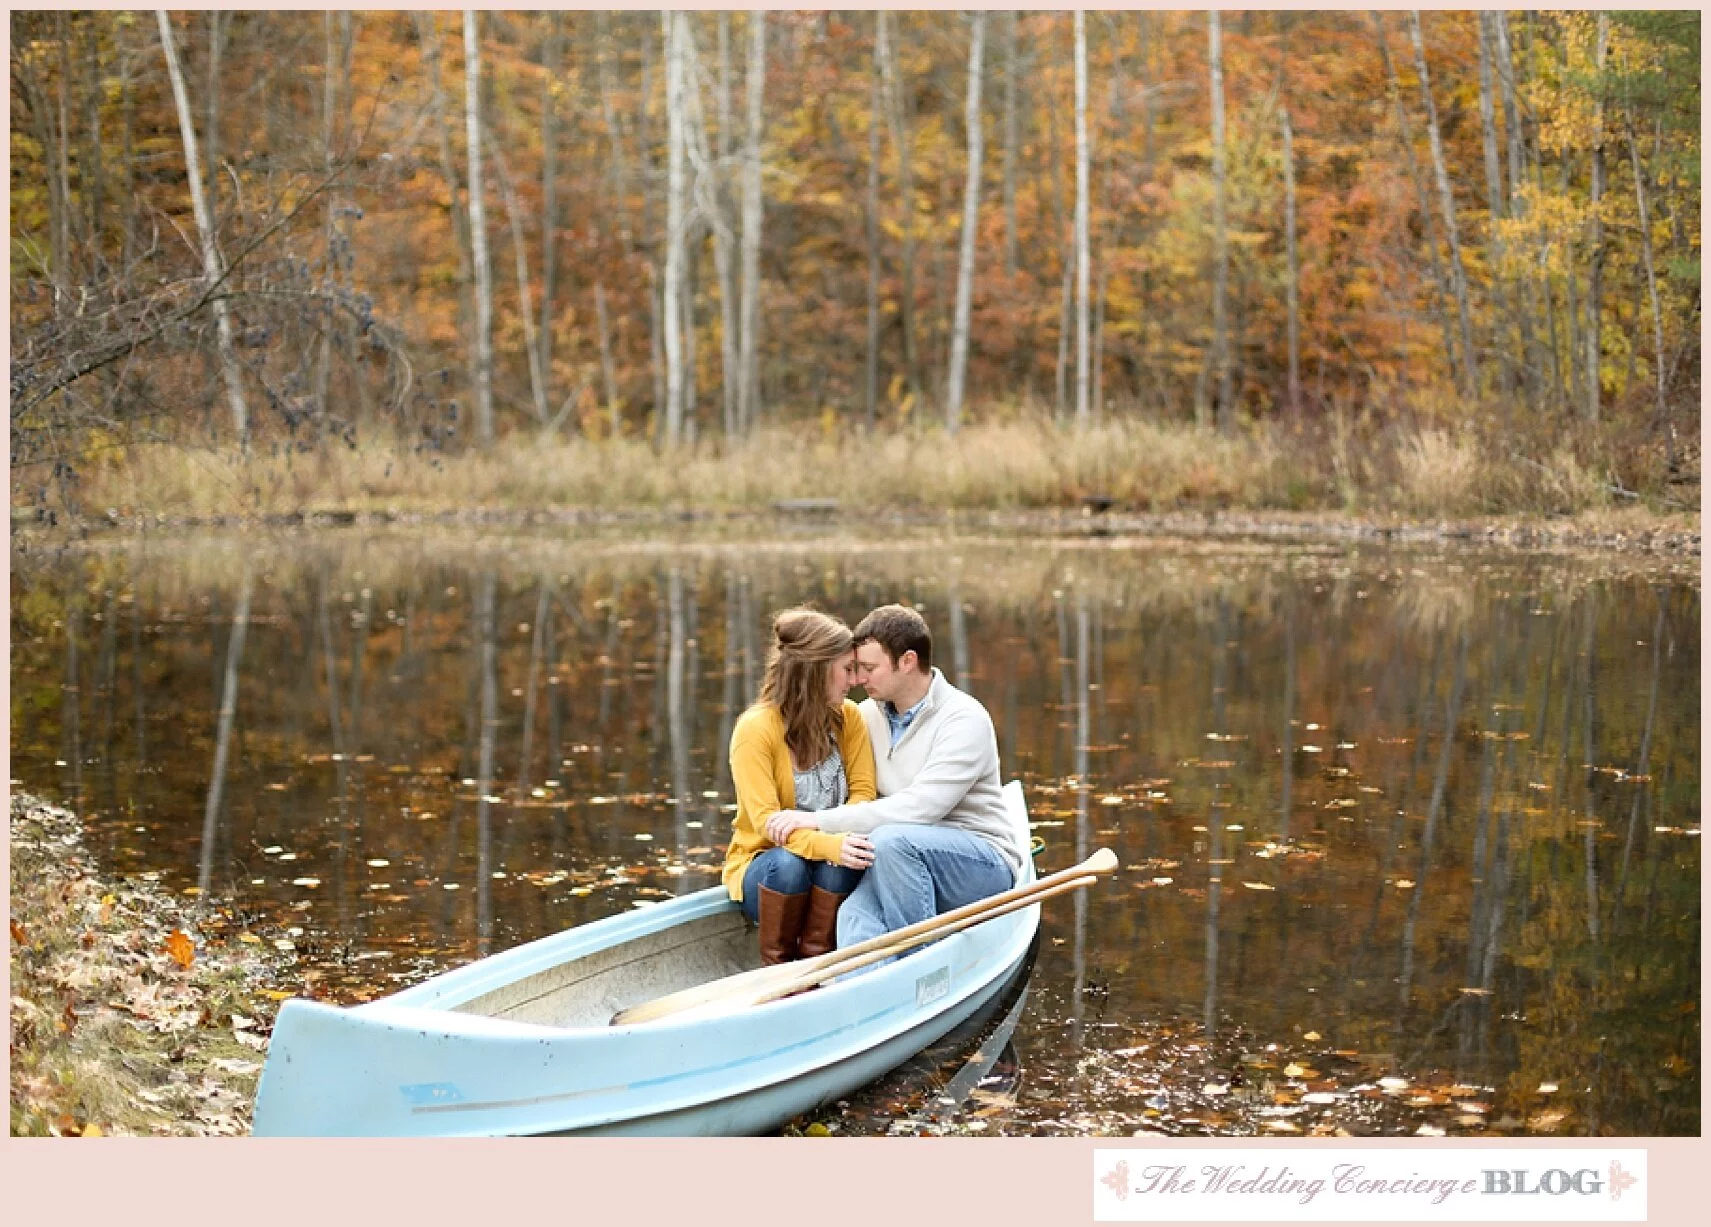 Rowing in Love - Michigan Engagement